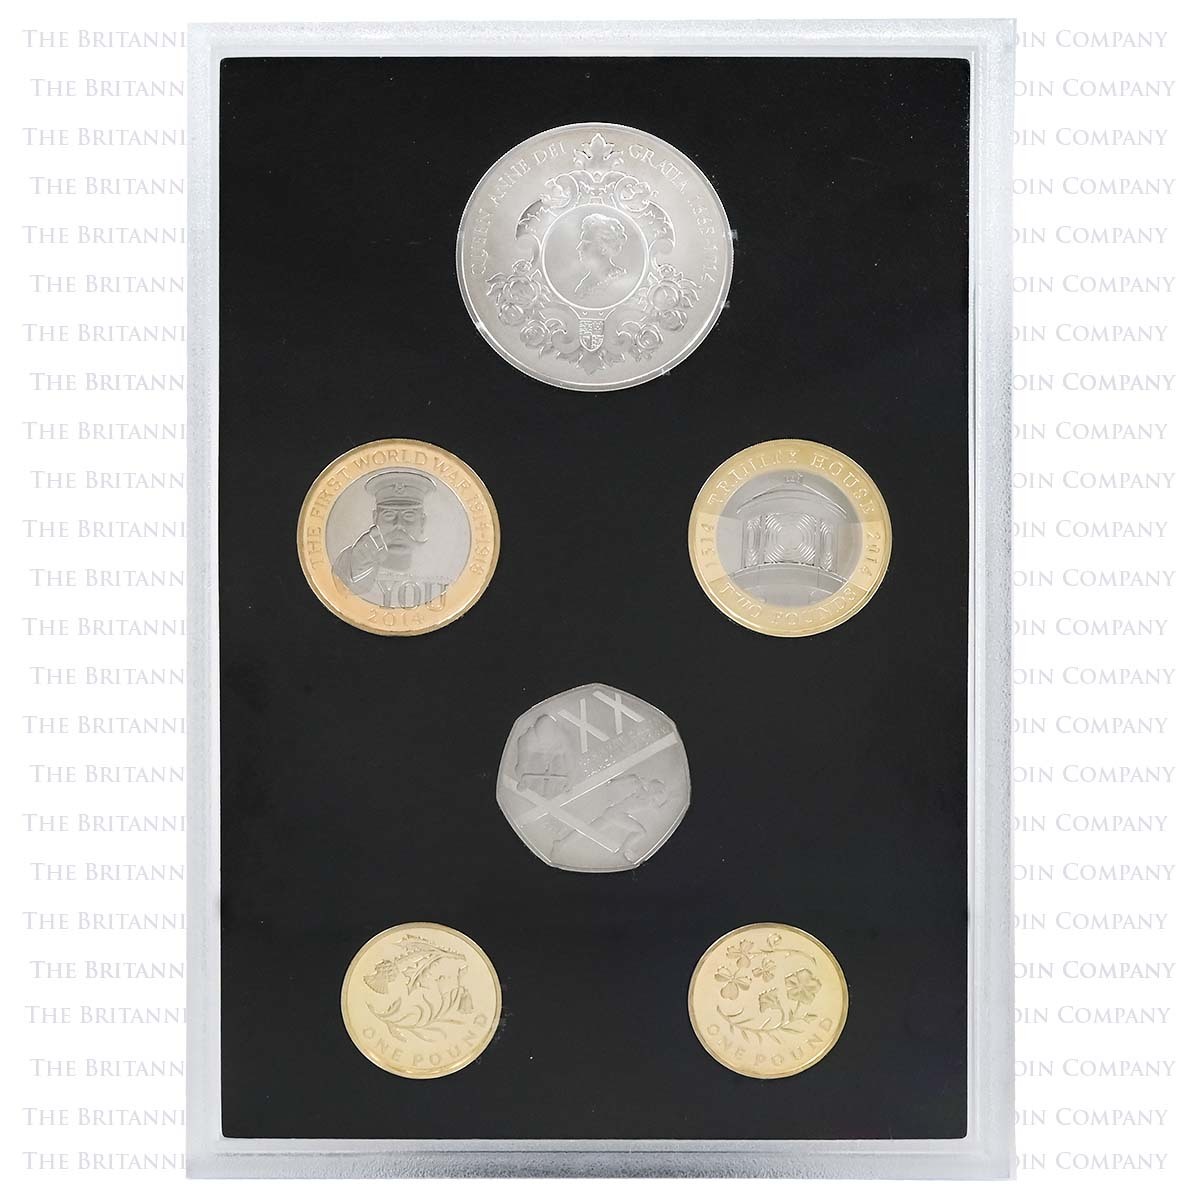 2014-proof-coin-set-collector-edtition.-004-m